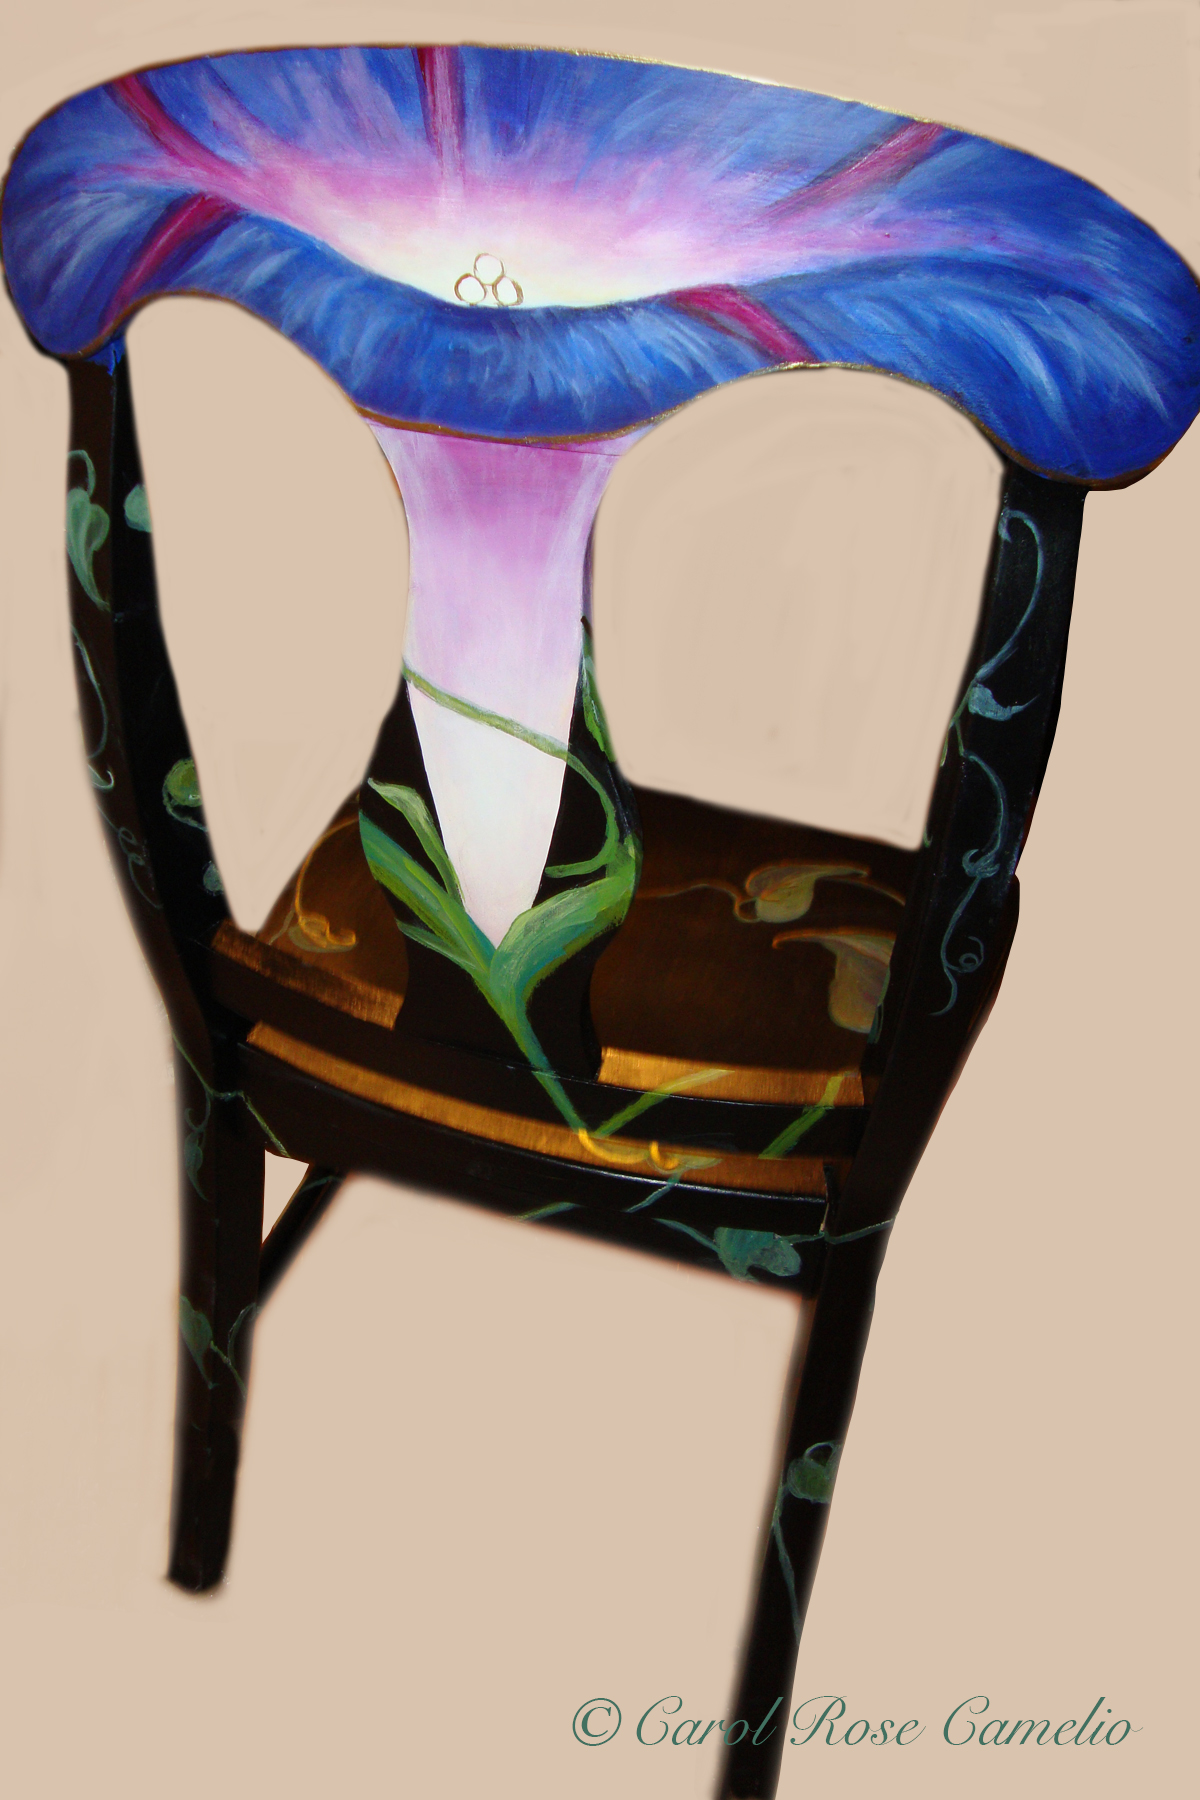 Glorious Morning, Back: The same chair as the previous image, with a morning glory design on the back as well.